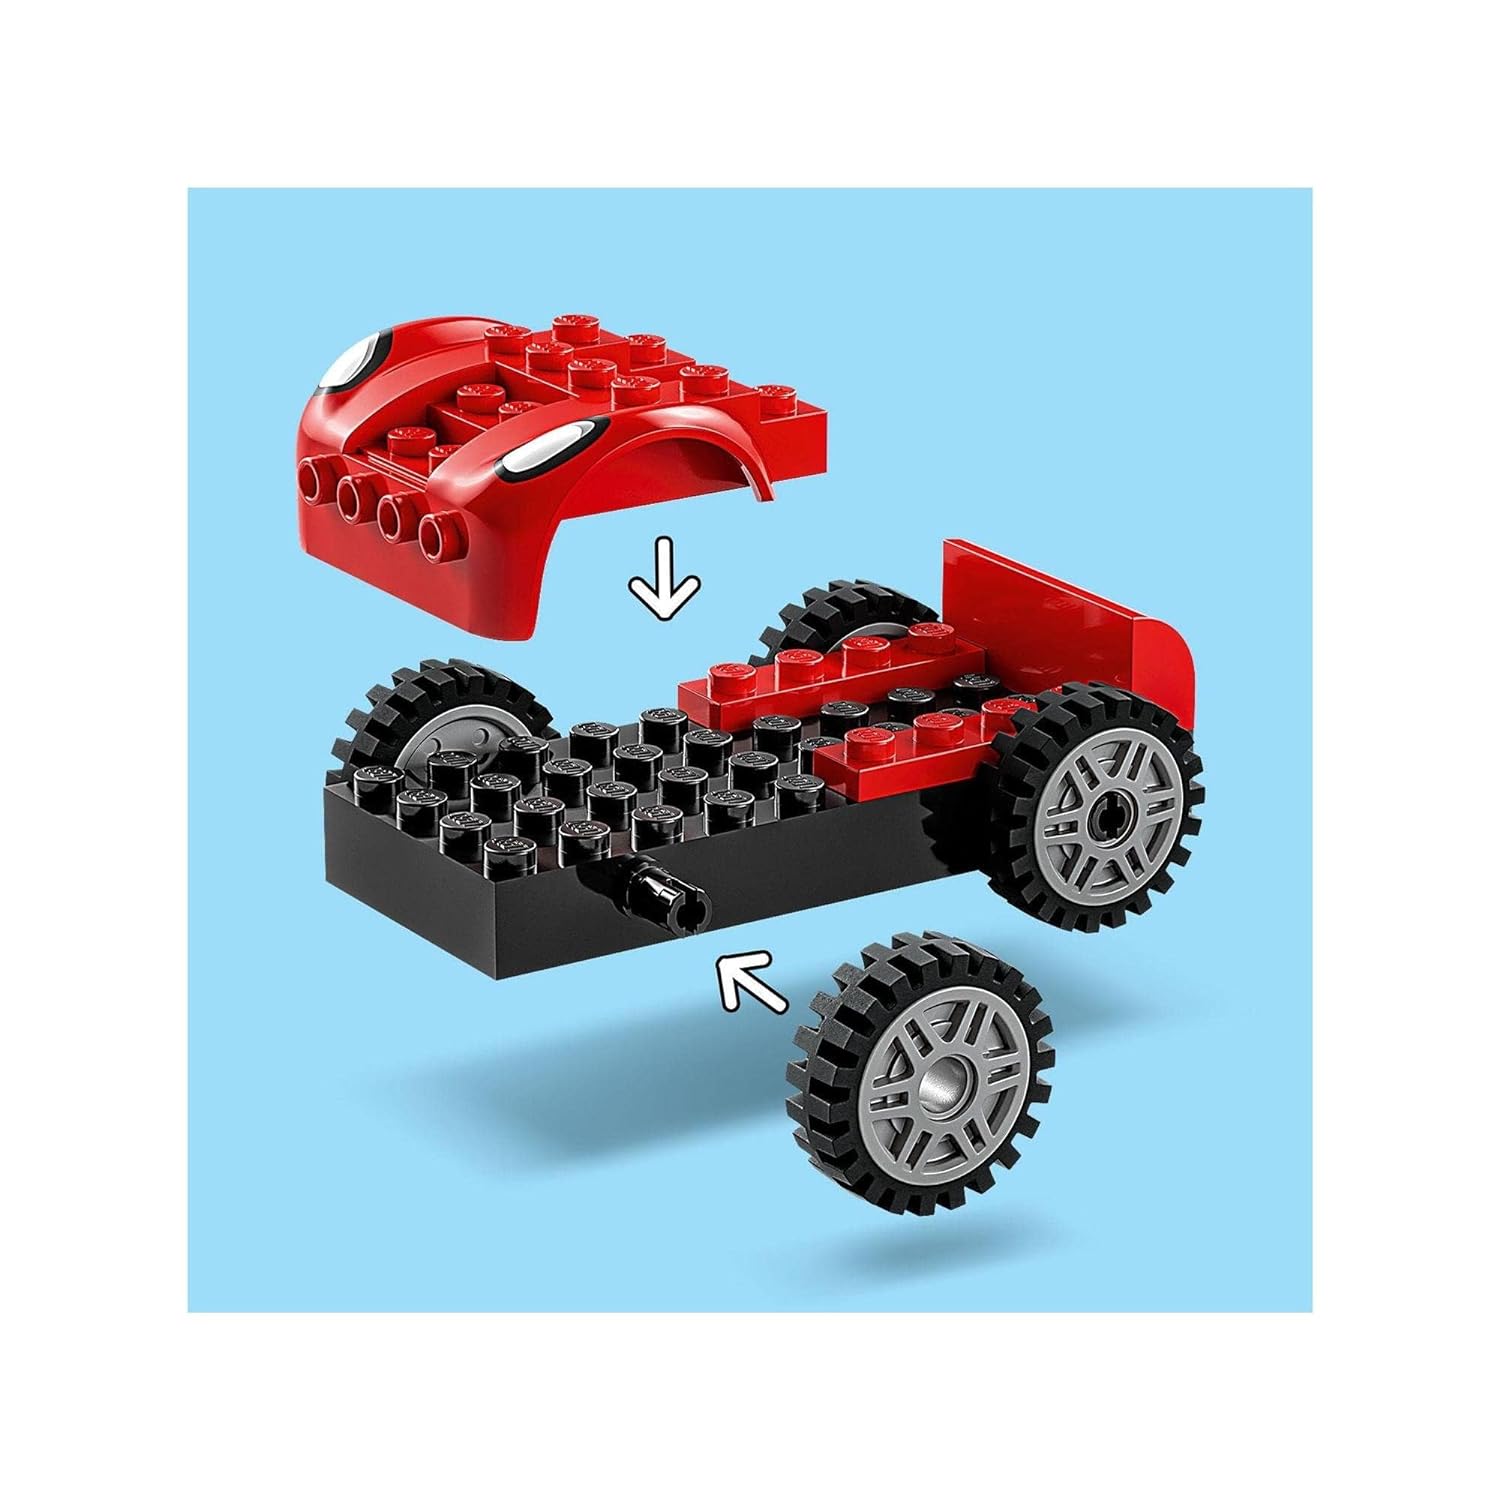 LEGO Marvel Spider-Man's Car and Doc Ock Building Kit for Ages 4+